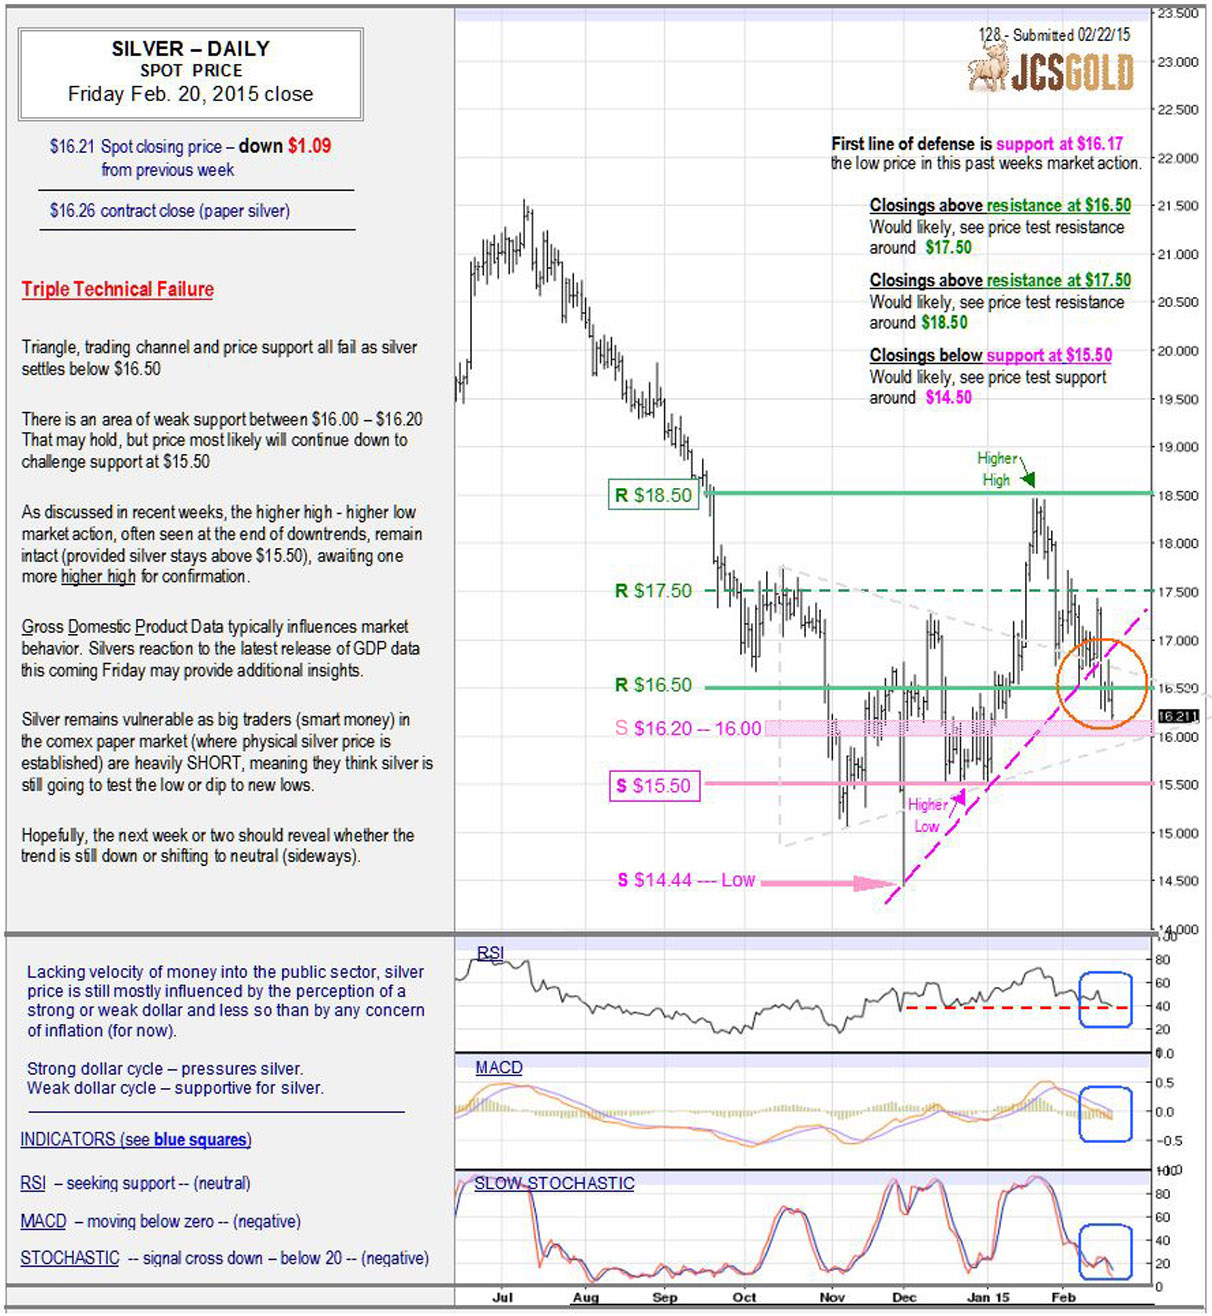 Feb 20, 2015 chart & commentary